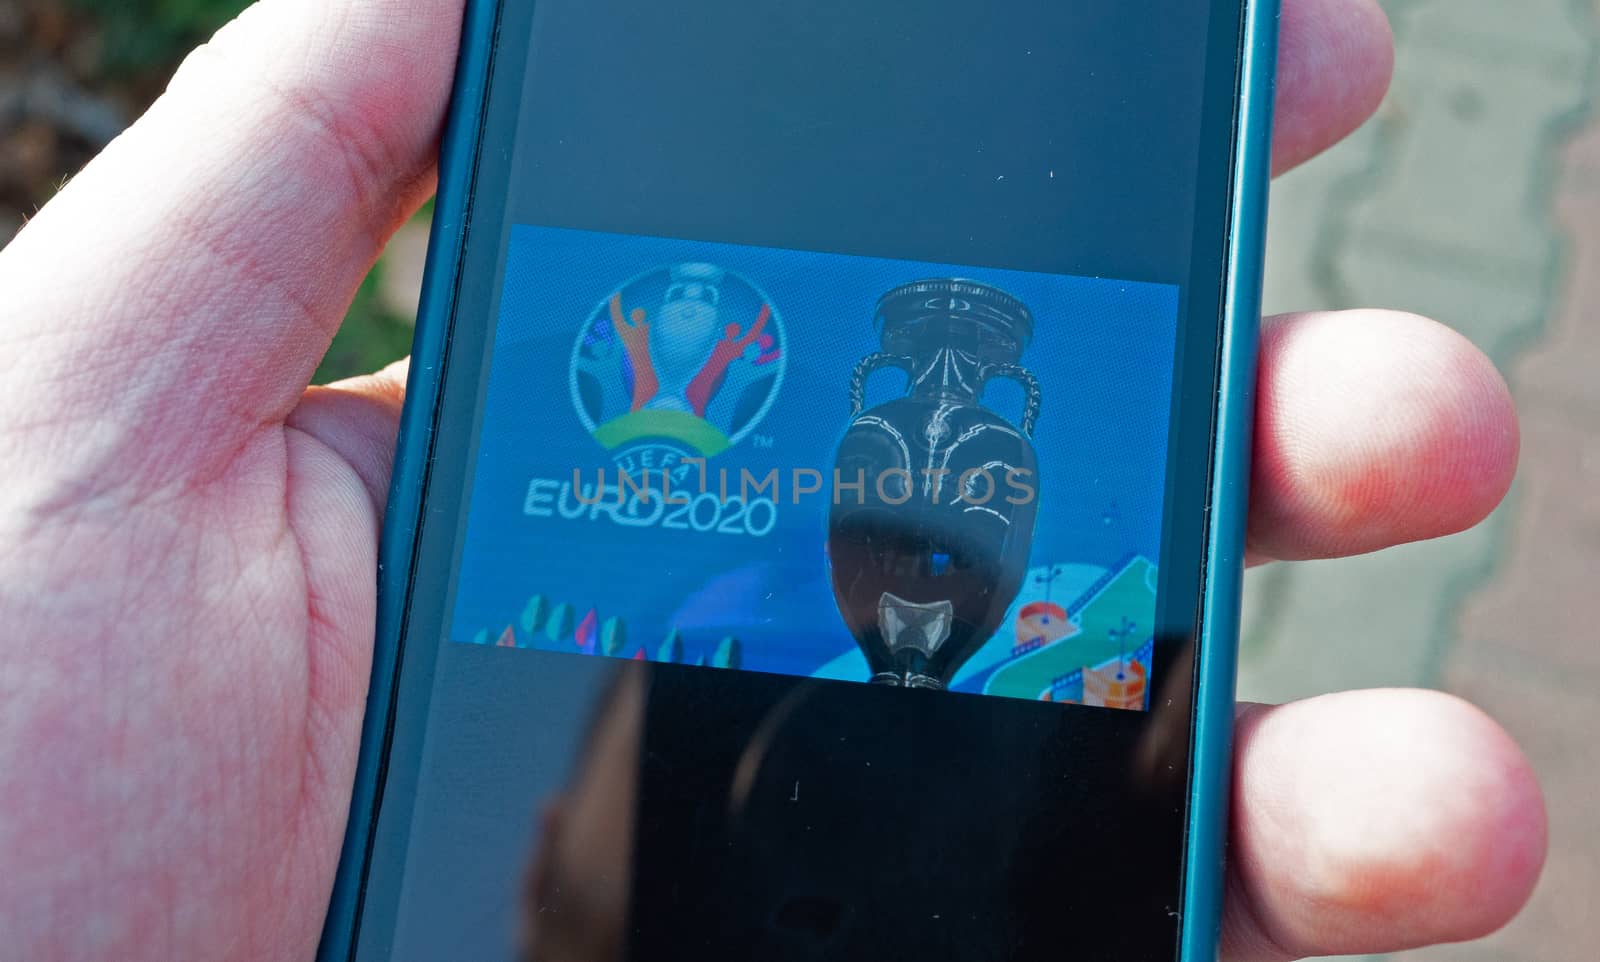 Emblem on smartphone screen by fifg